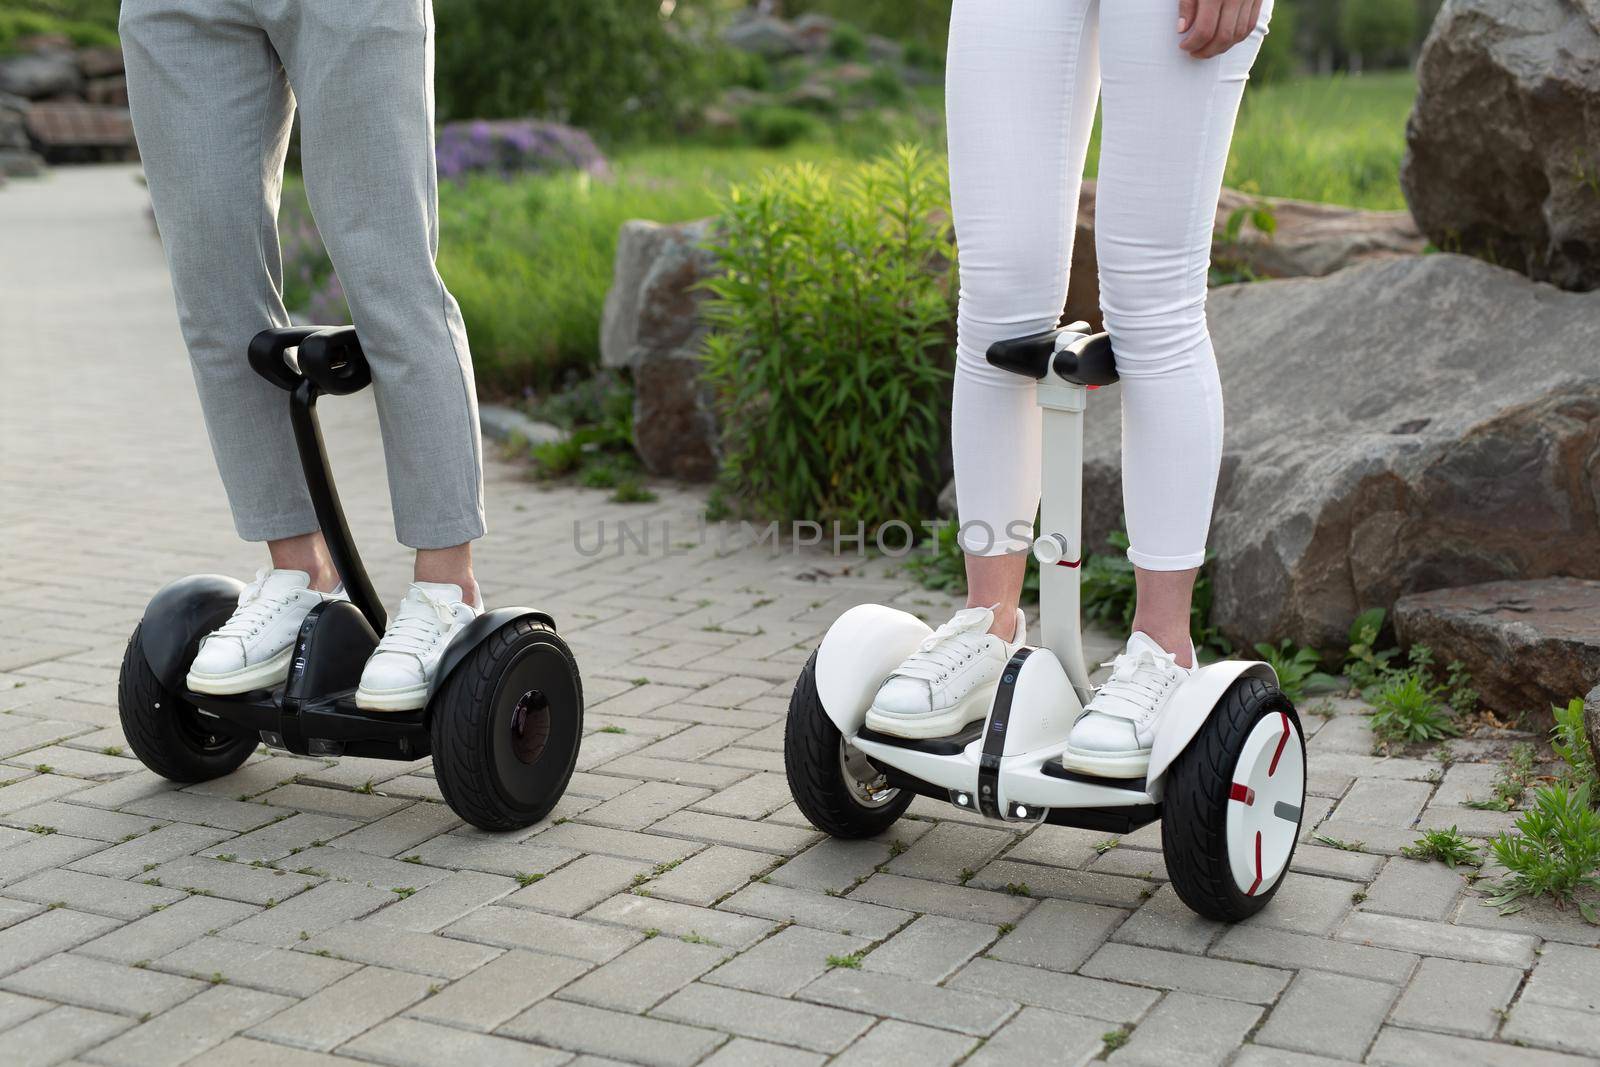 Legs of man and woman riding on the Hoverboard for relaxing time together outdoor at the city